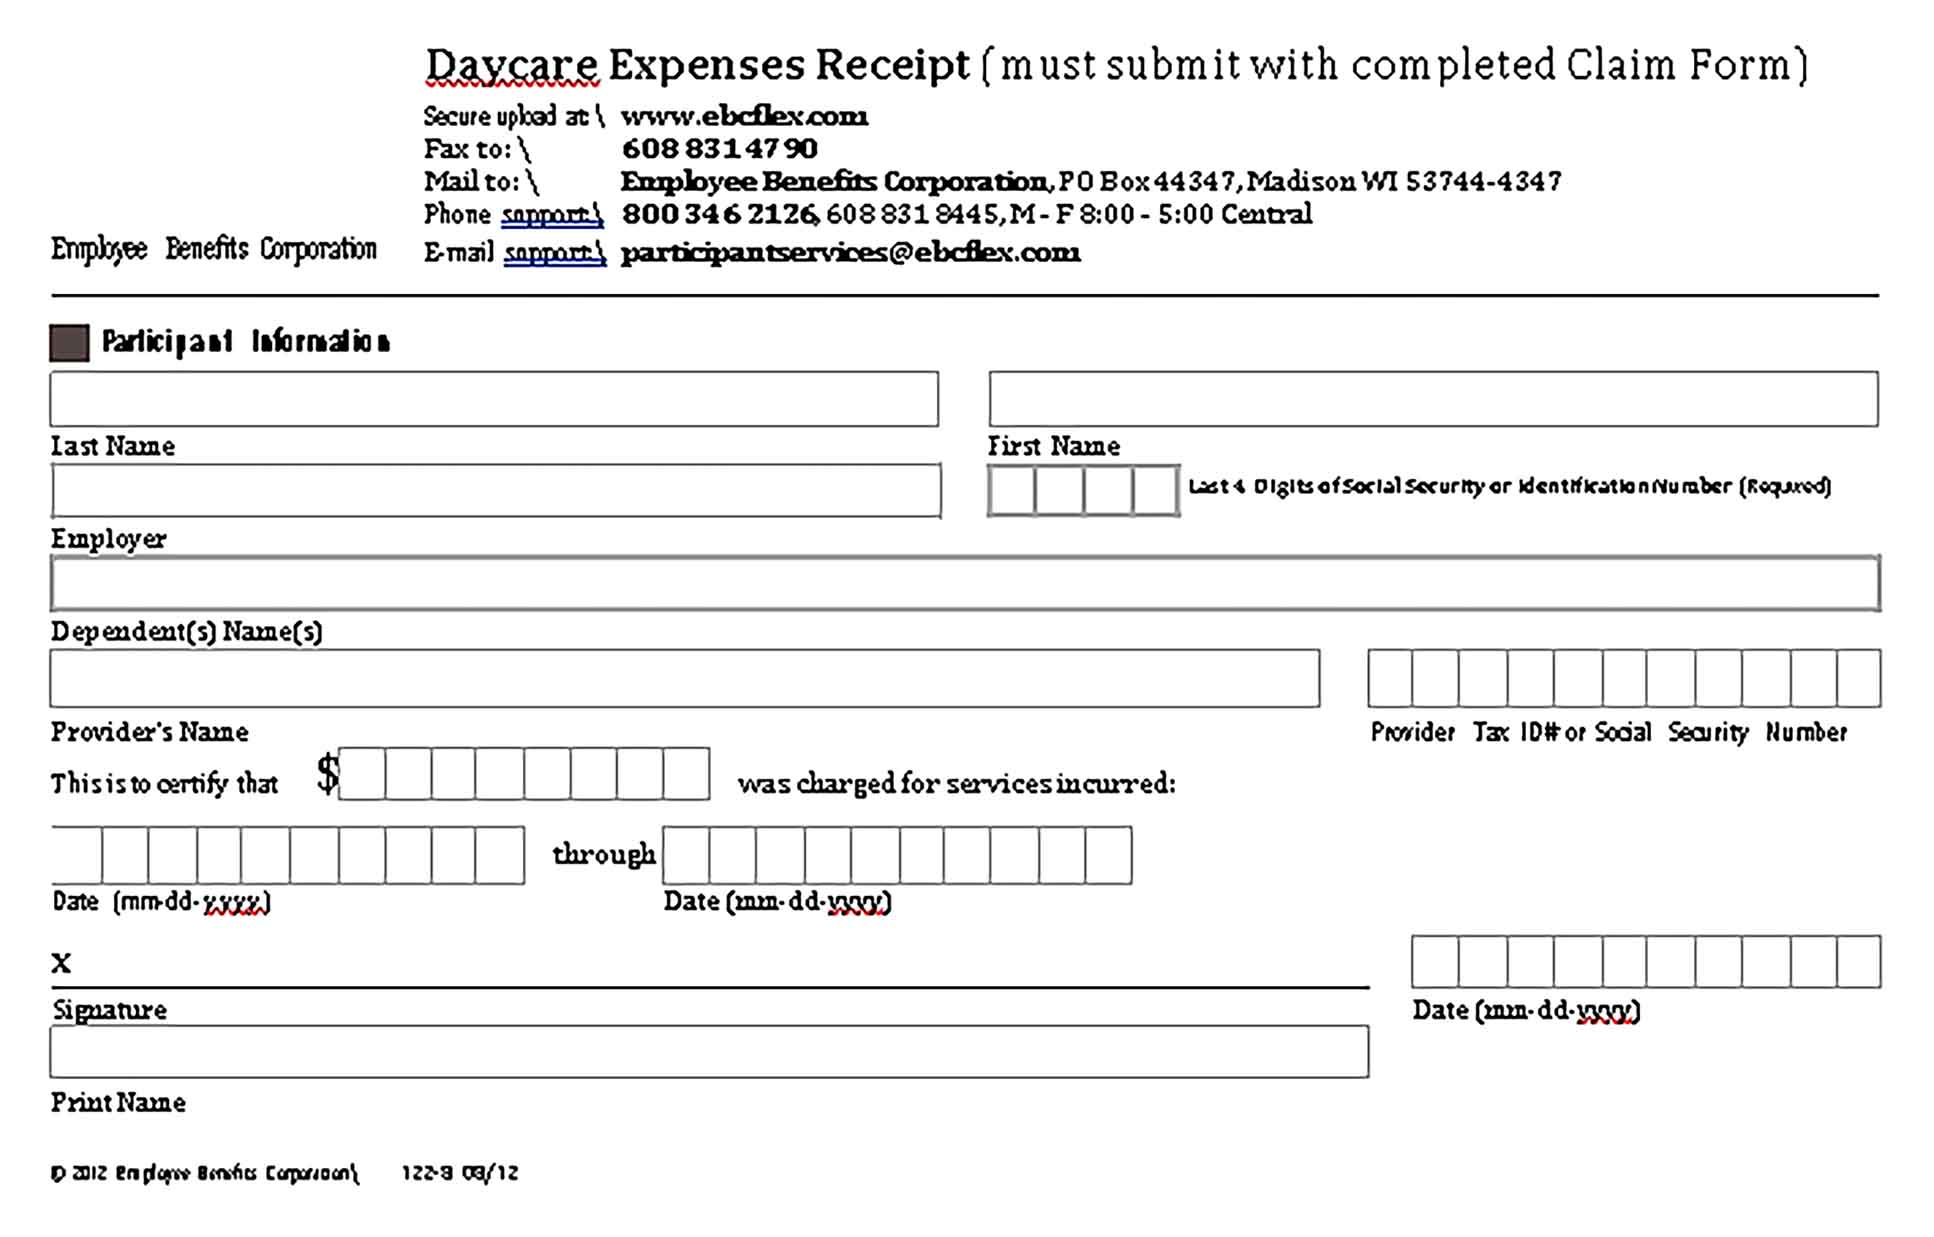 Sample Daycare Expenses Receipt Templates 1